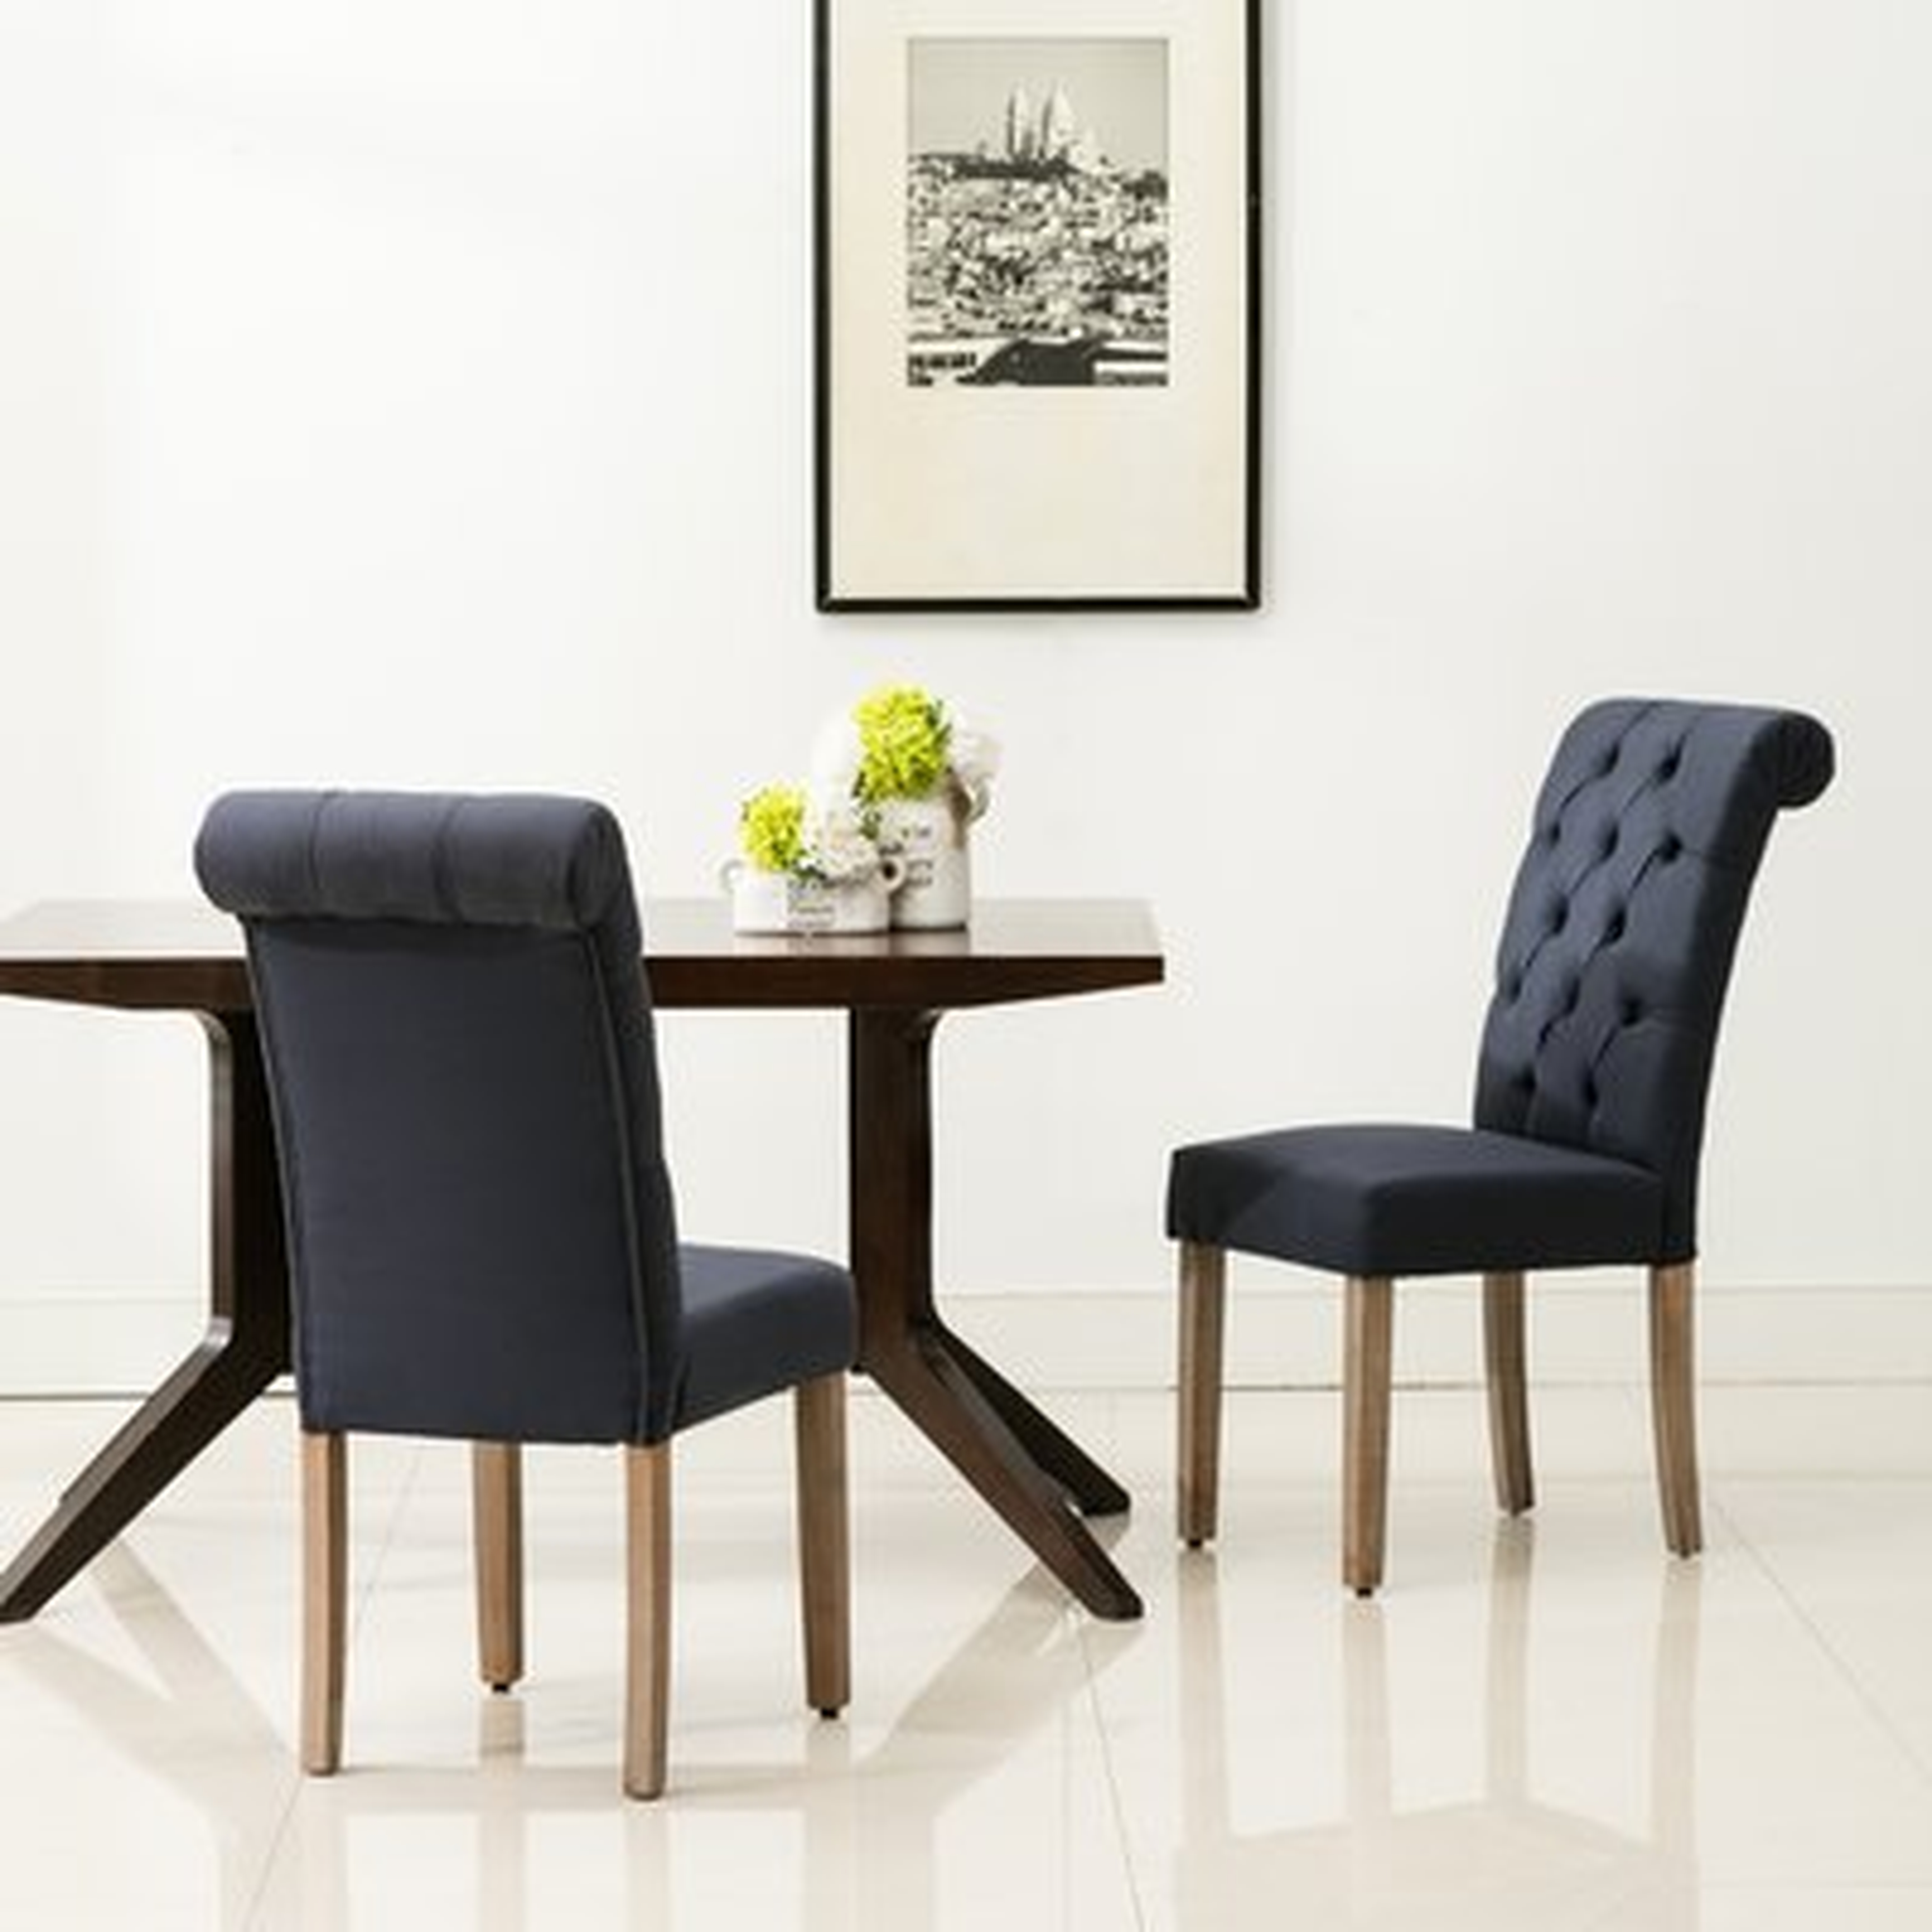 Bushey Roll Top Tufted Modern Upholstered Dining Chair (set of 2) - Wayfair